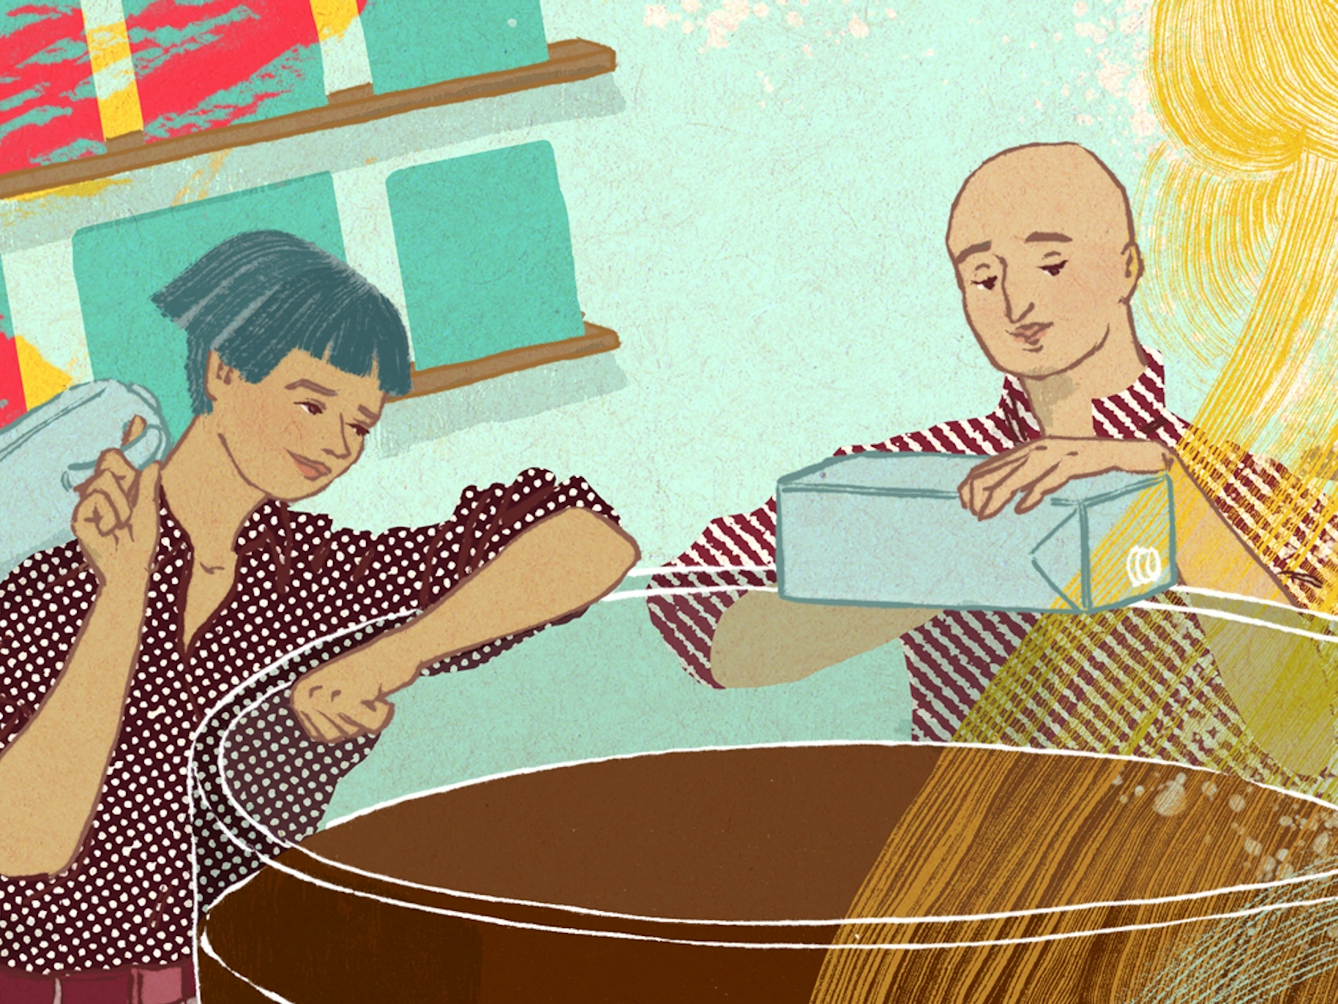 A digital illustration of people in a café, gathered around a large cup of coffee. The two central figures are pouring cartons of oat milk into the coffee. There are large swirls of steam coming from the coffee, behind which there are shelves of books and artworks.